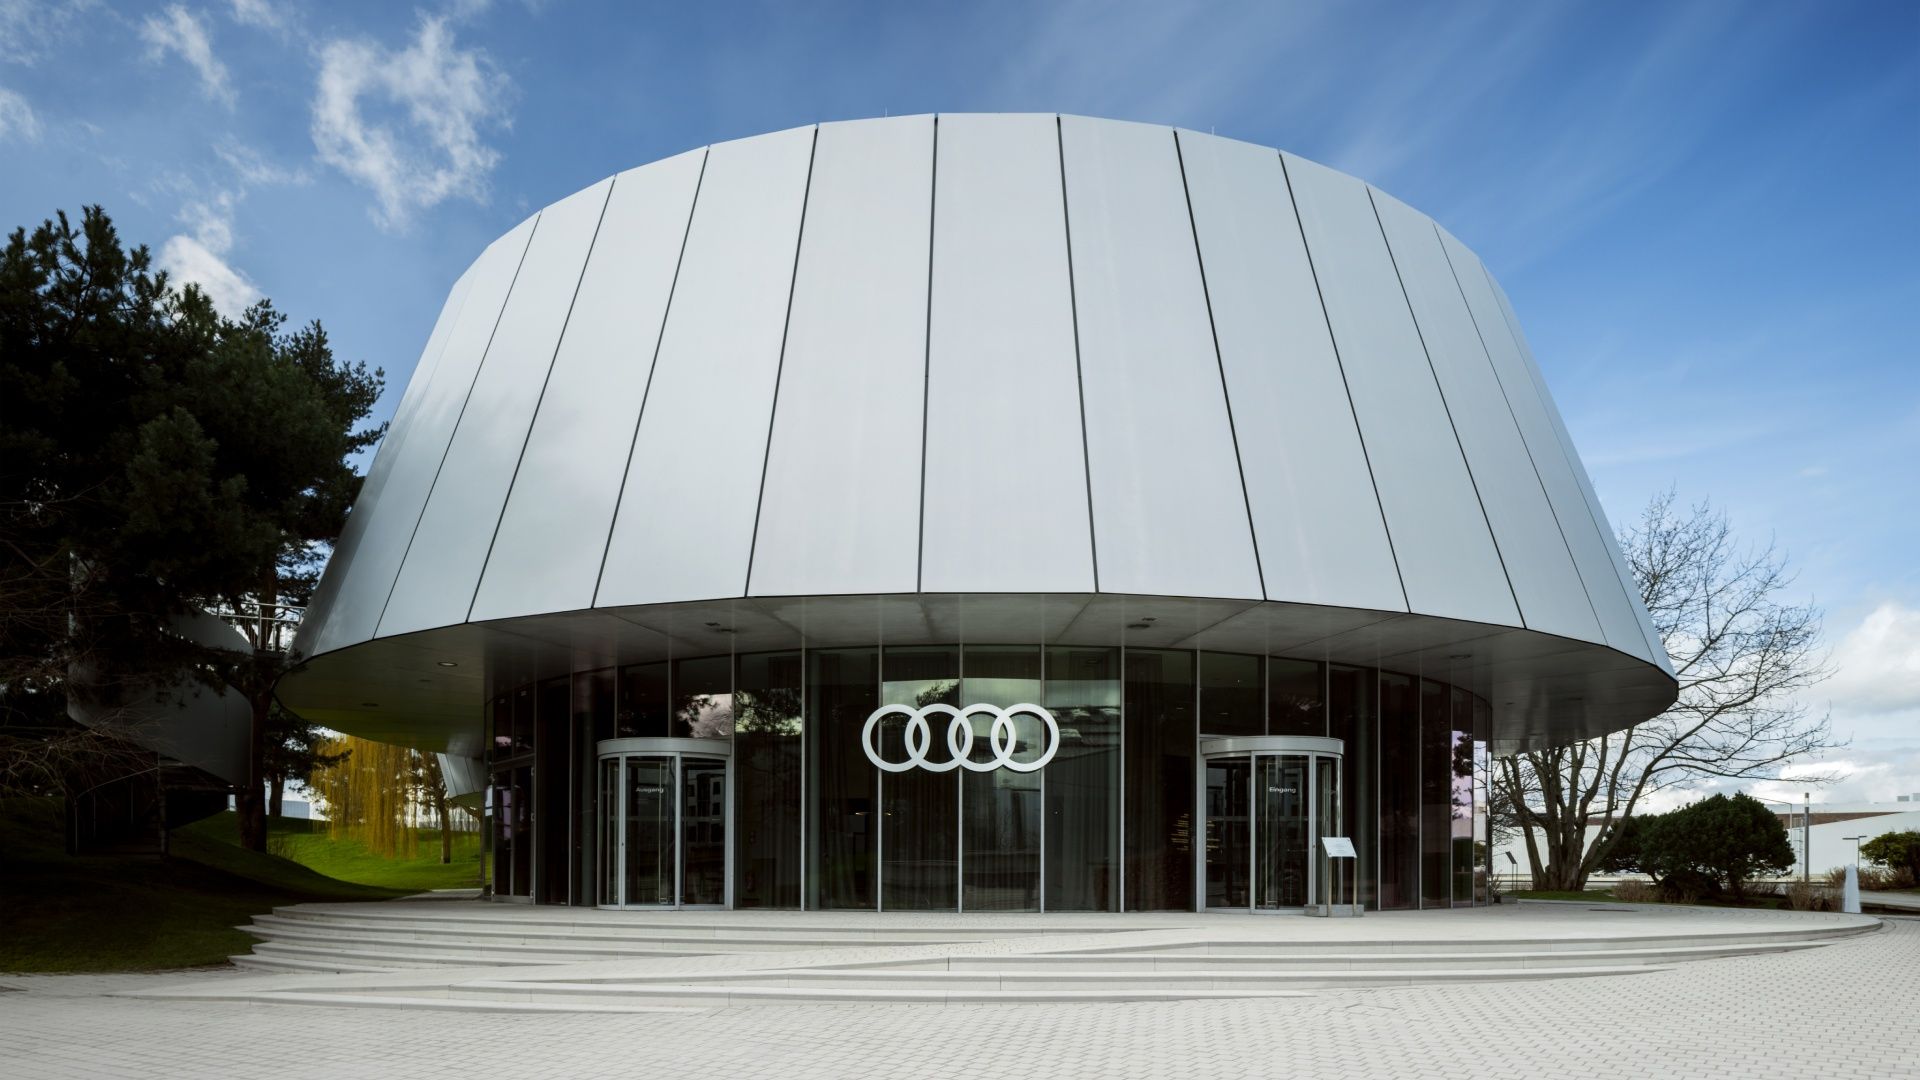 Exterior view of the Audi House of Progress in the Autostadt Wolfsburg.